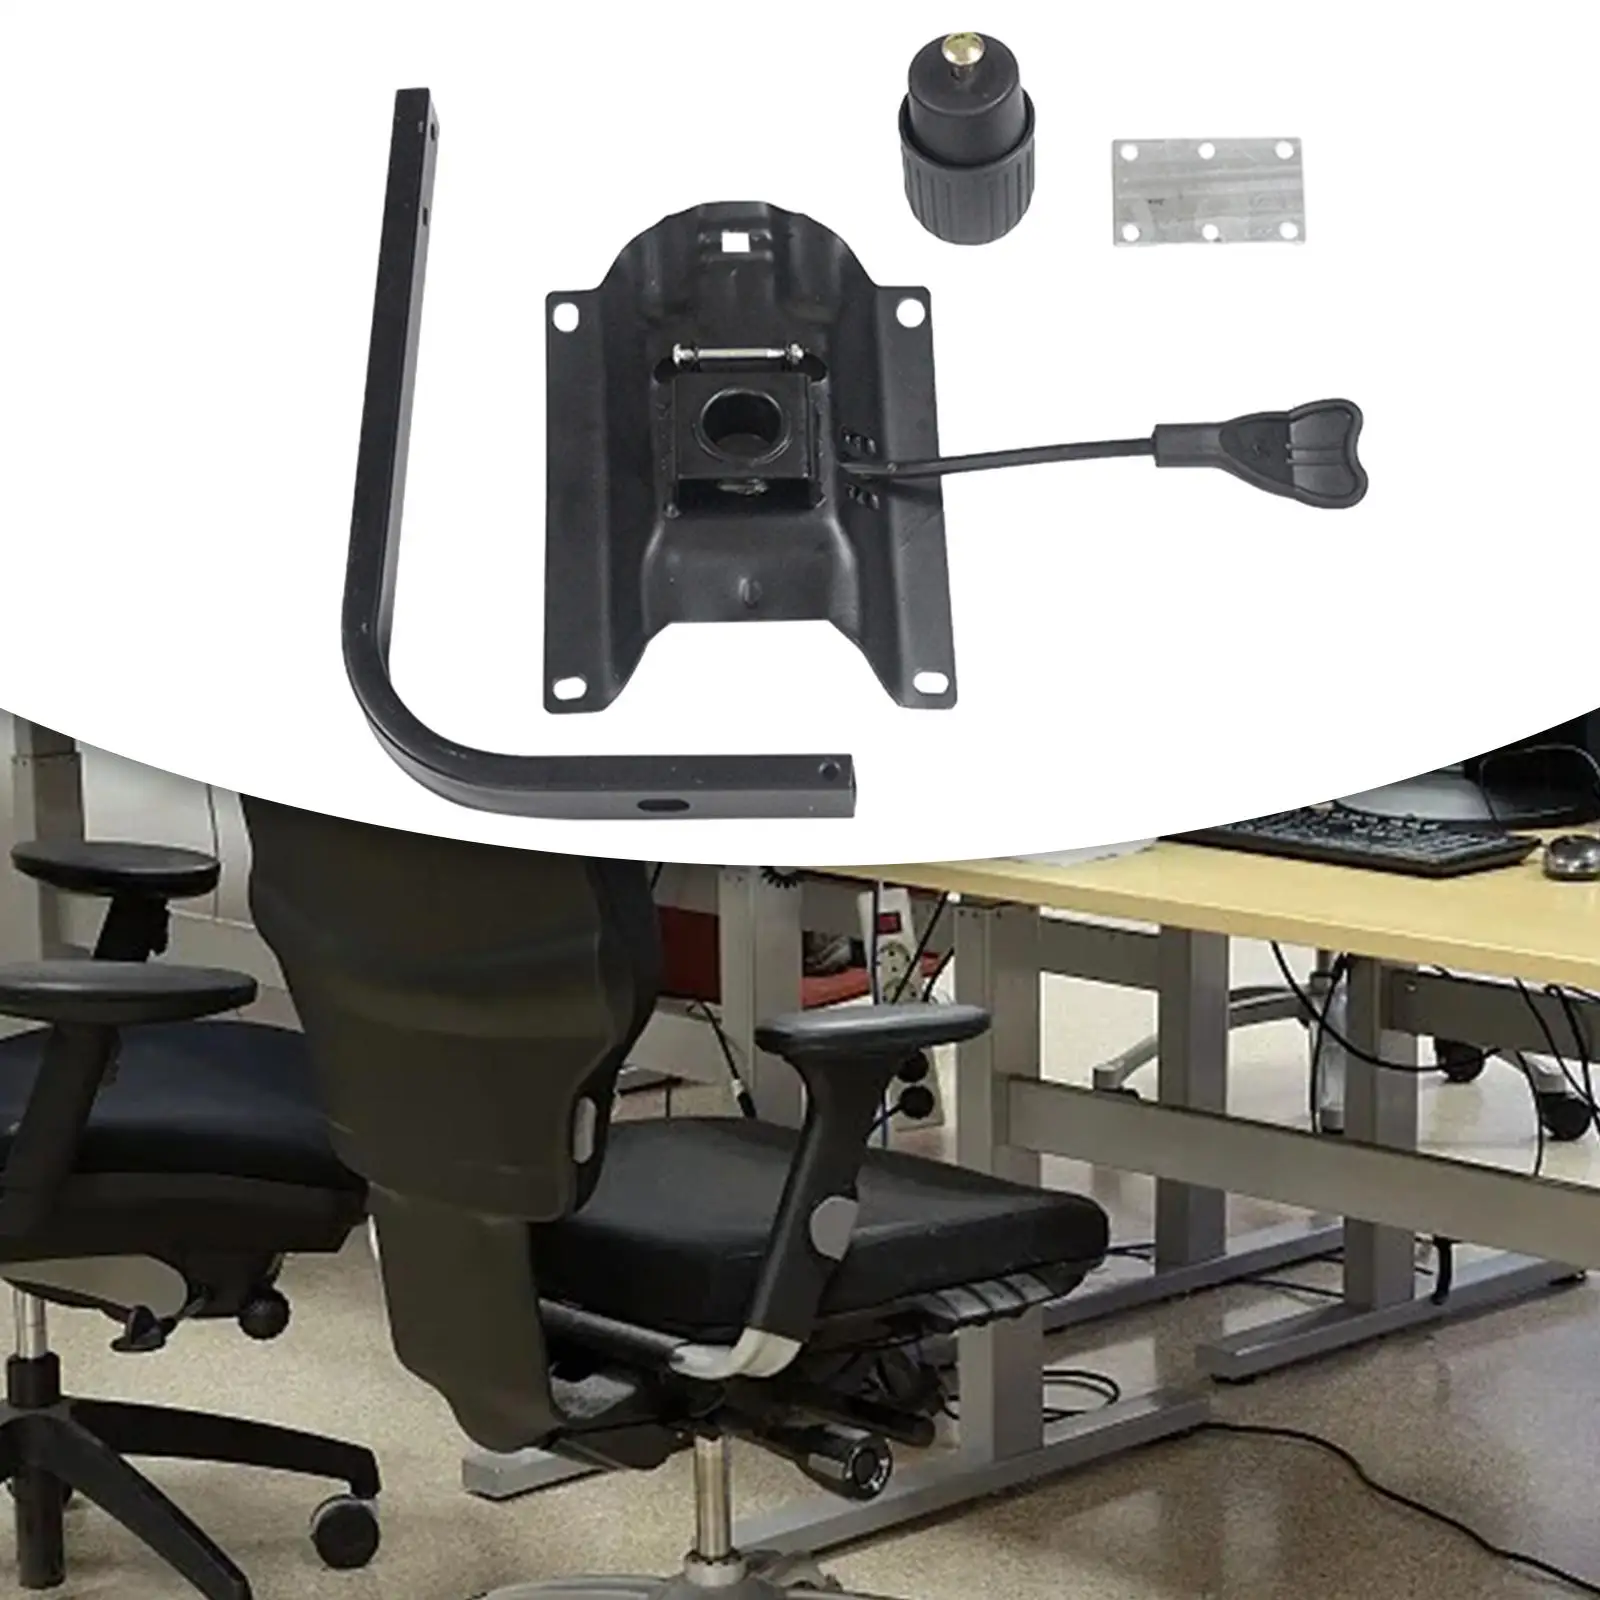 Gaming Chair Swivel Tilt Control High Bearing Metal Easy to Install Lifting Tilt Control Mechanism for Desk Chair